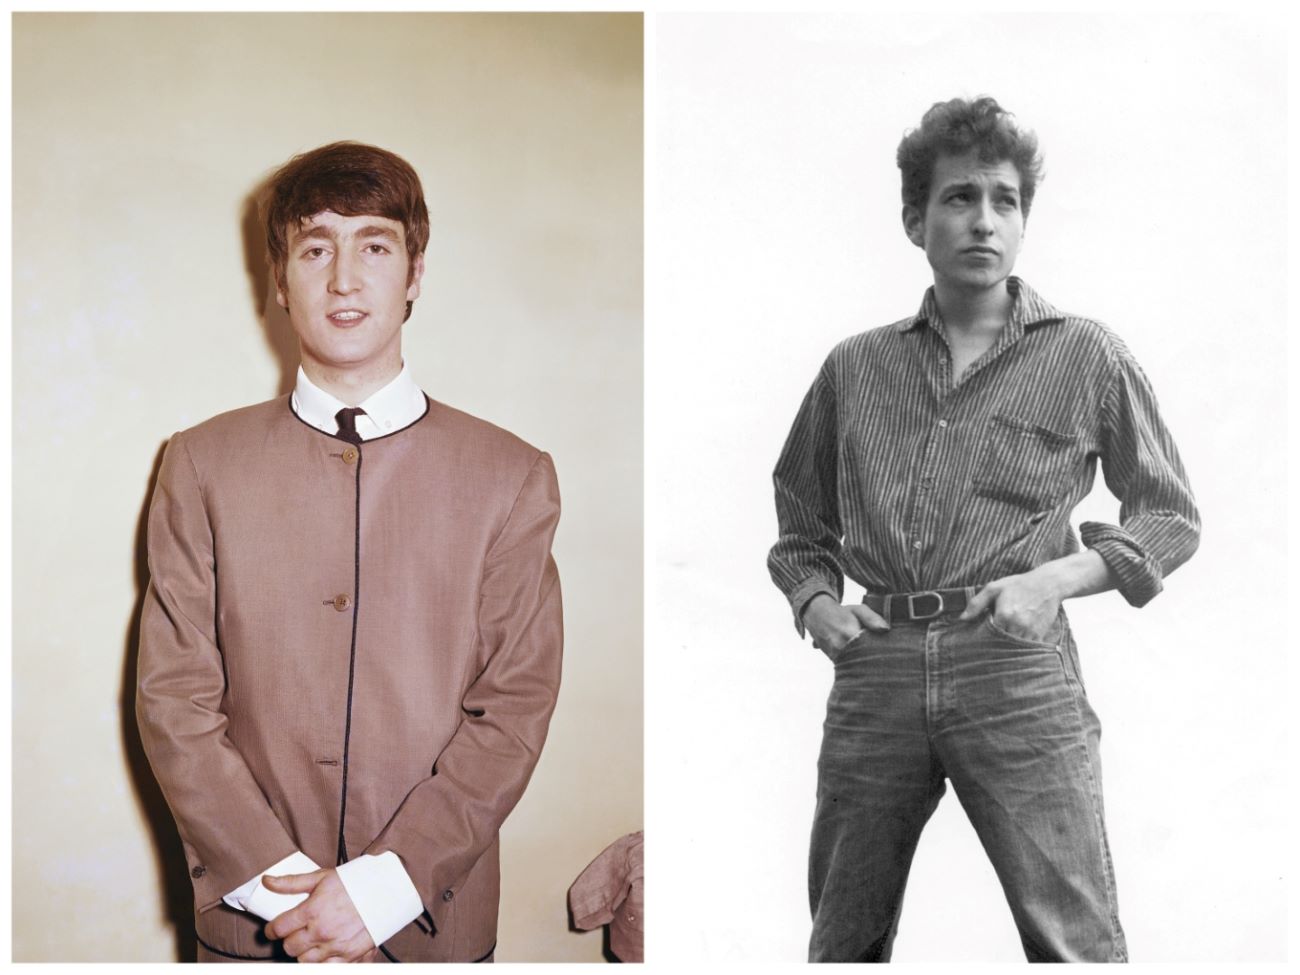 John Lennon wears a gray suit and stands with his hands clasped in front of himself. Bob Dylan wears jeans and a button down shirt and stands with his hands in his pockets.